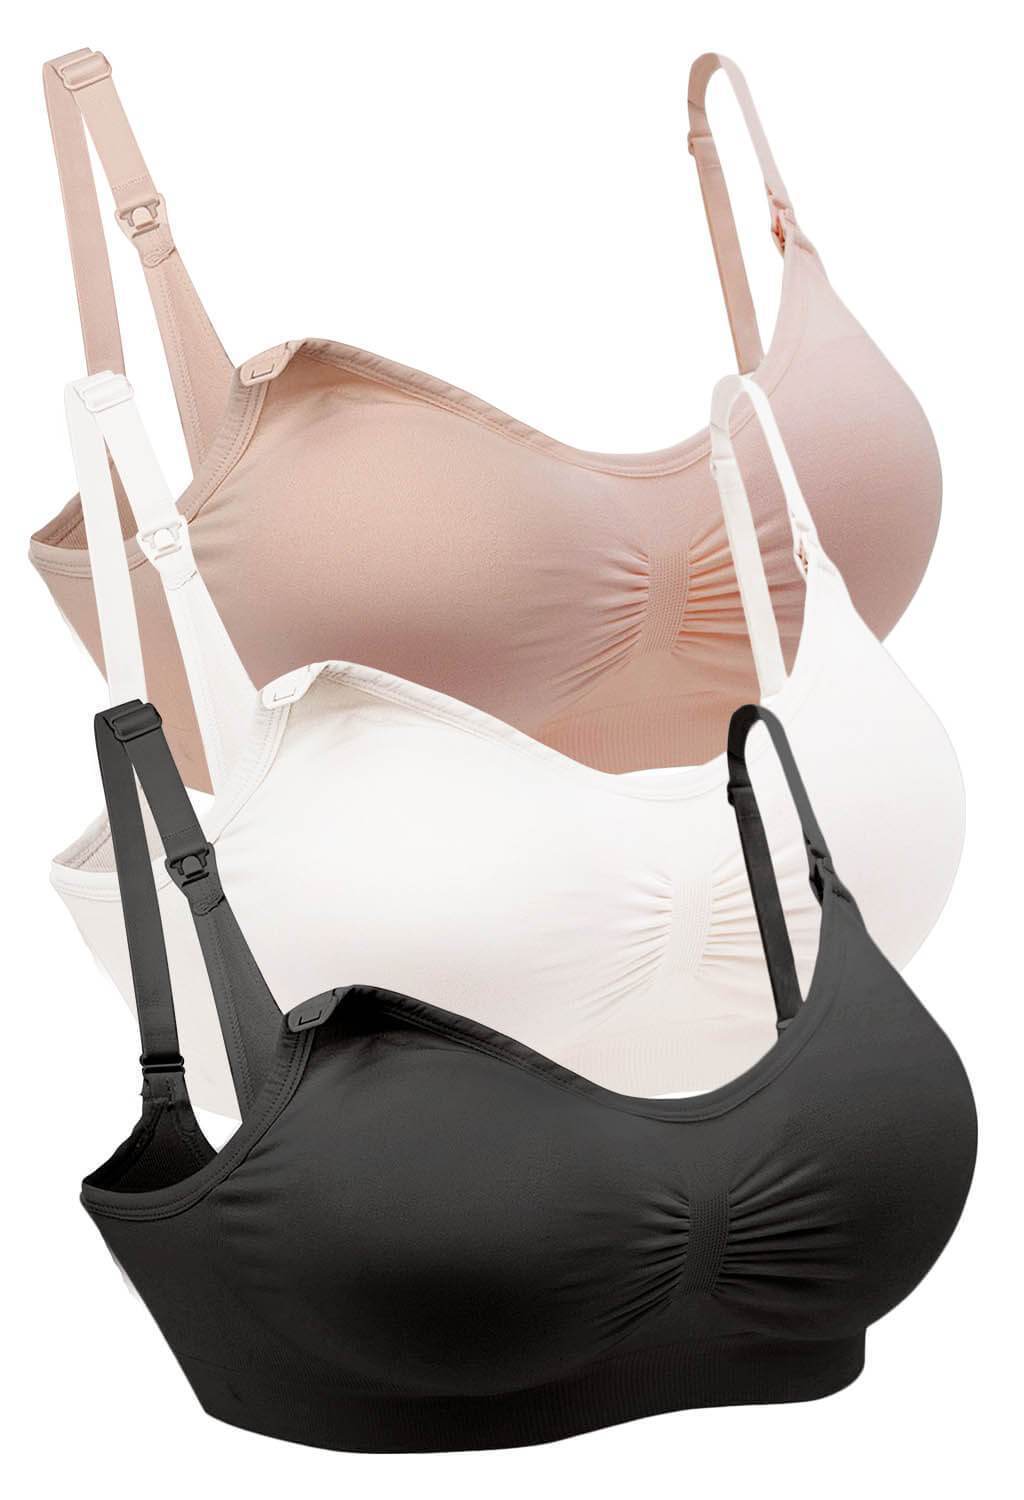 4-Pack Of Women's Seamless Nursing Bras, No Wires, Removable Pads